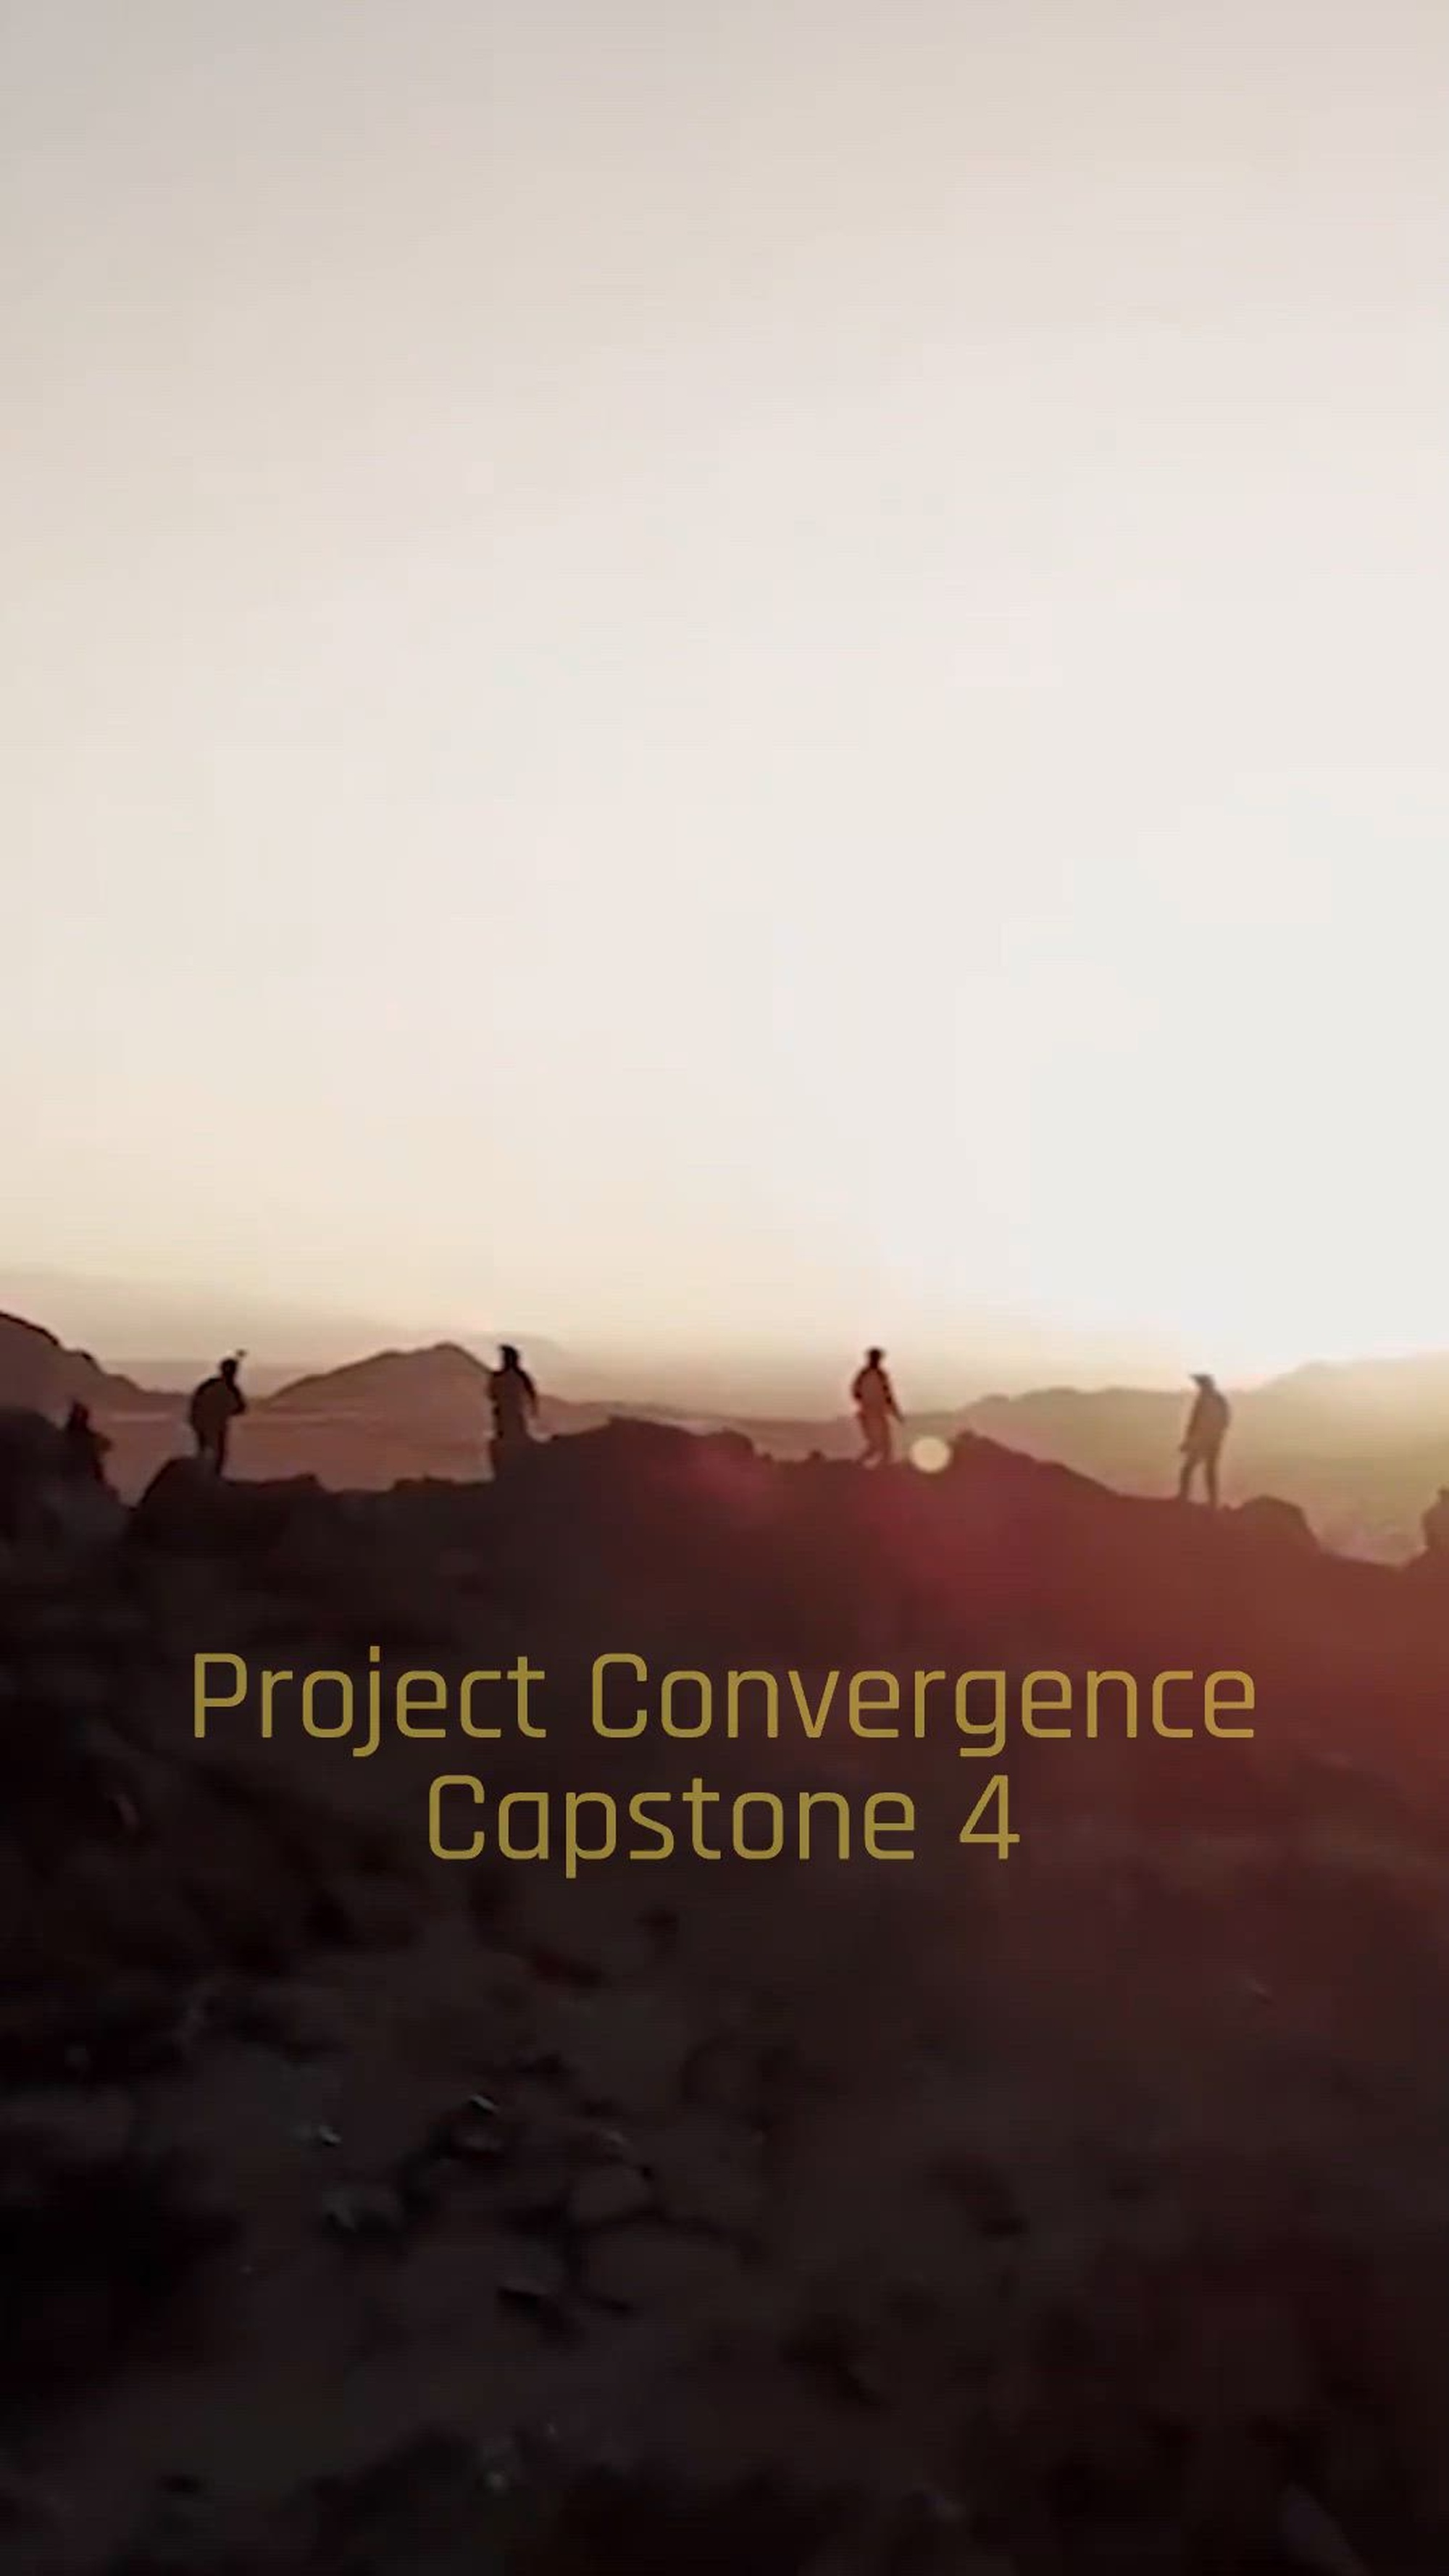 The U.S. Army and Army Futures Command will host Project Convergence Capstone 4 (PC-C4), a joint and multination, two-phase, experiment from Feb. 23 – March 20, 2024.
PC-C4 provides a critical venue to transform the Army, and to ensure future war-winning readiness with joint and allied participation. PC-C4 participants include the U.S. Army, U.S. Navy, U.S. Air Force, U.S. Marine Corps, U.S. Space Force, and militaries allies from Australia, Canada, France, Japan, New Zealand and the United Kingdom. 

PC-C4 is a culmination of numerous preceding exercises, experimentations, and events; it provides a critical venue to identify and refine recommendations necessary to transform the Army and ensure future war-winning readiness. (U.S. Army video by Sgt. David Rincon)